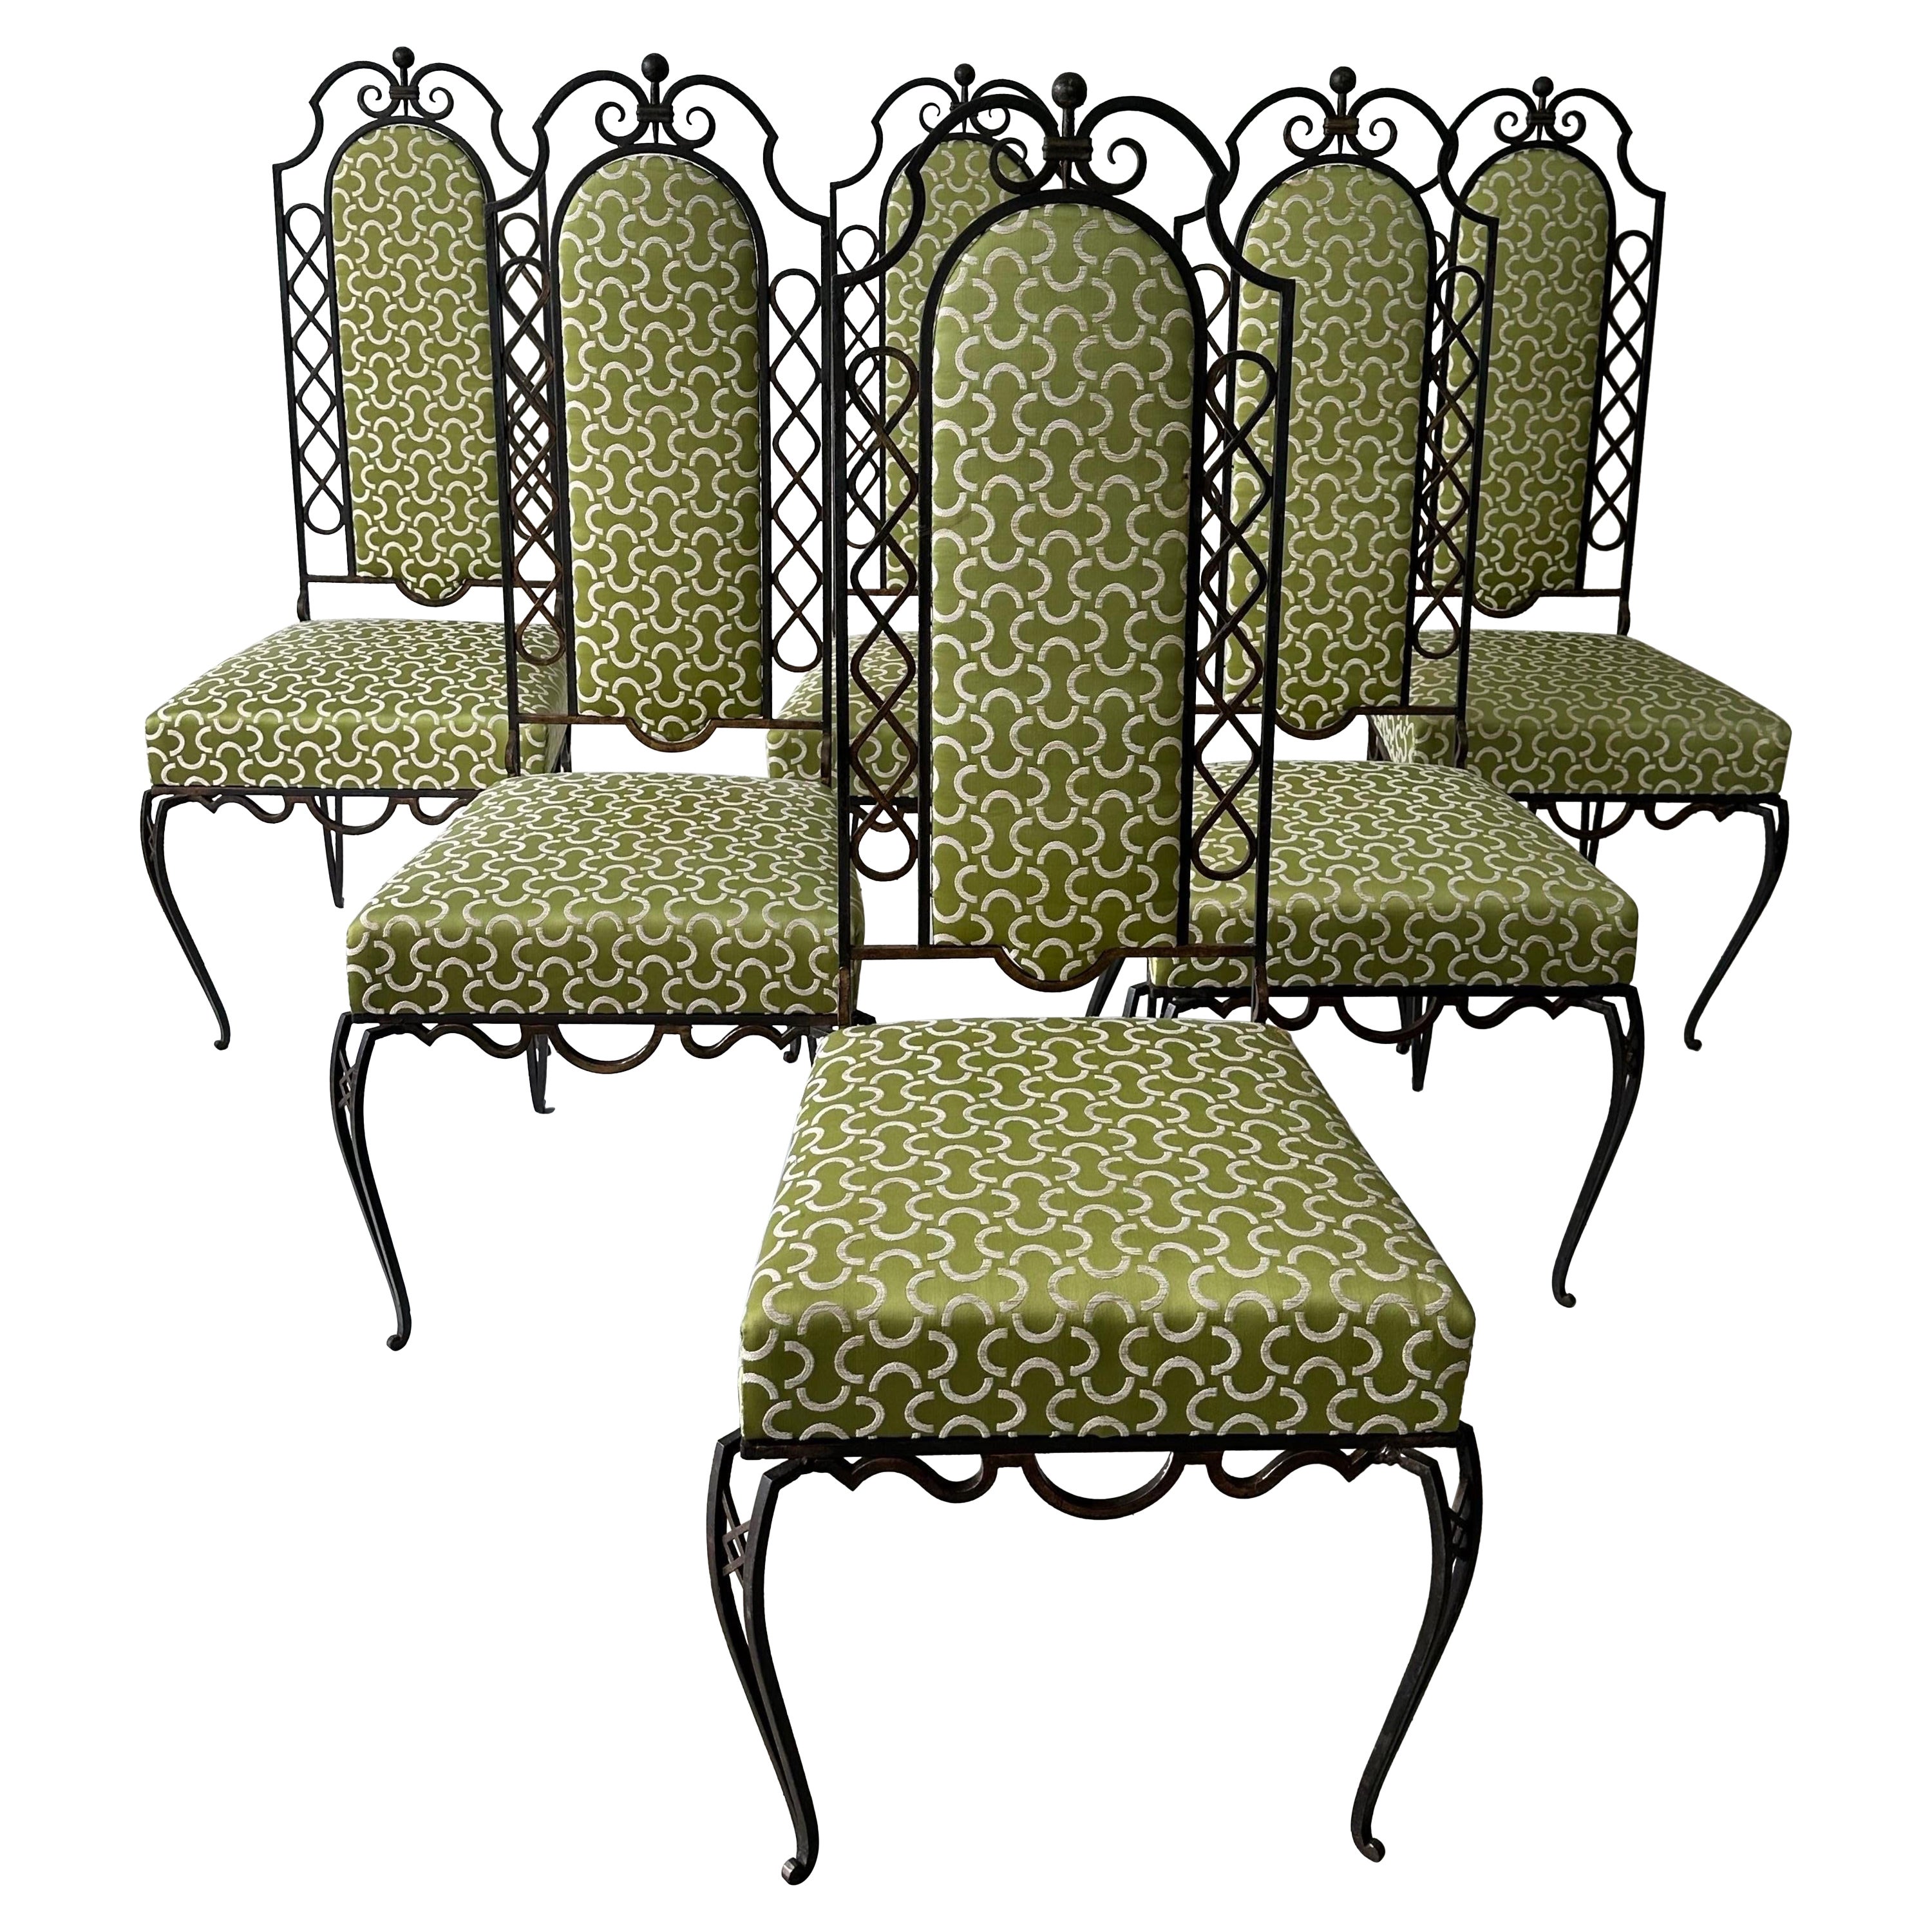 Set of 6 Rene Prou wrought iron Dining Room Chairs 